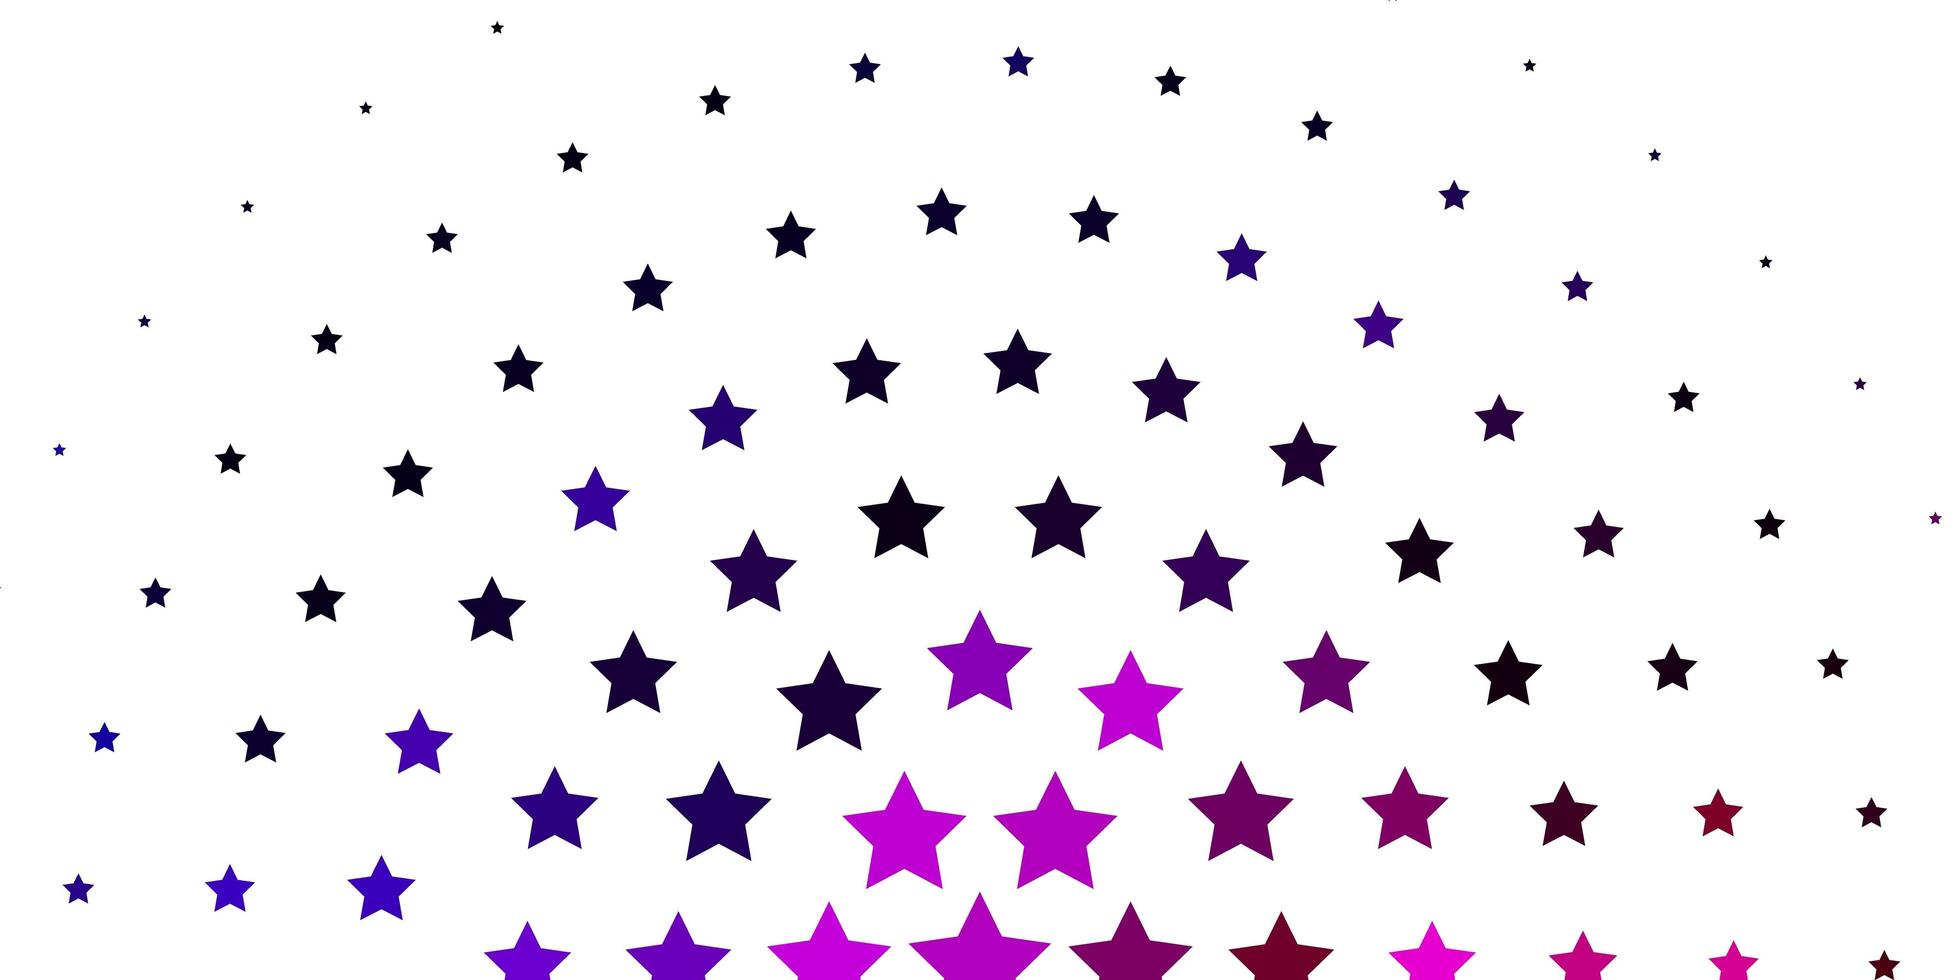 Light Purple, Pink vector layout with bright stars. Colorful illustration in abstract style with gradient stars. Design for your business promotion.